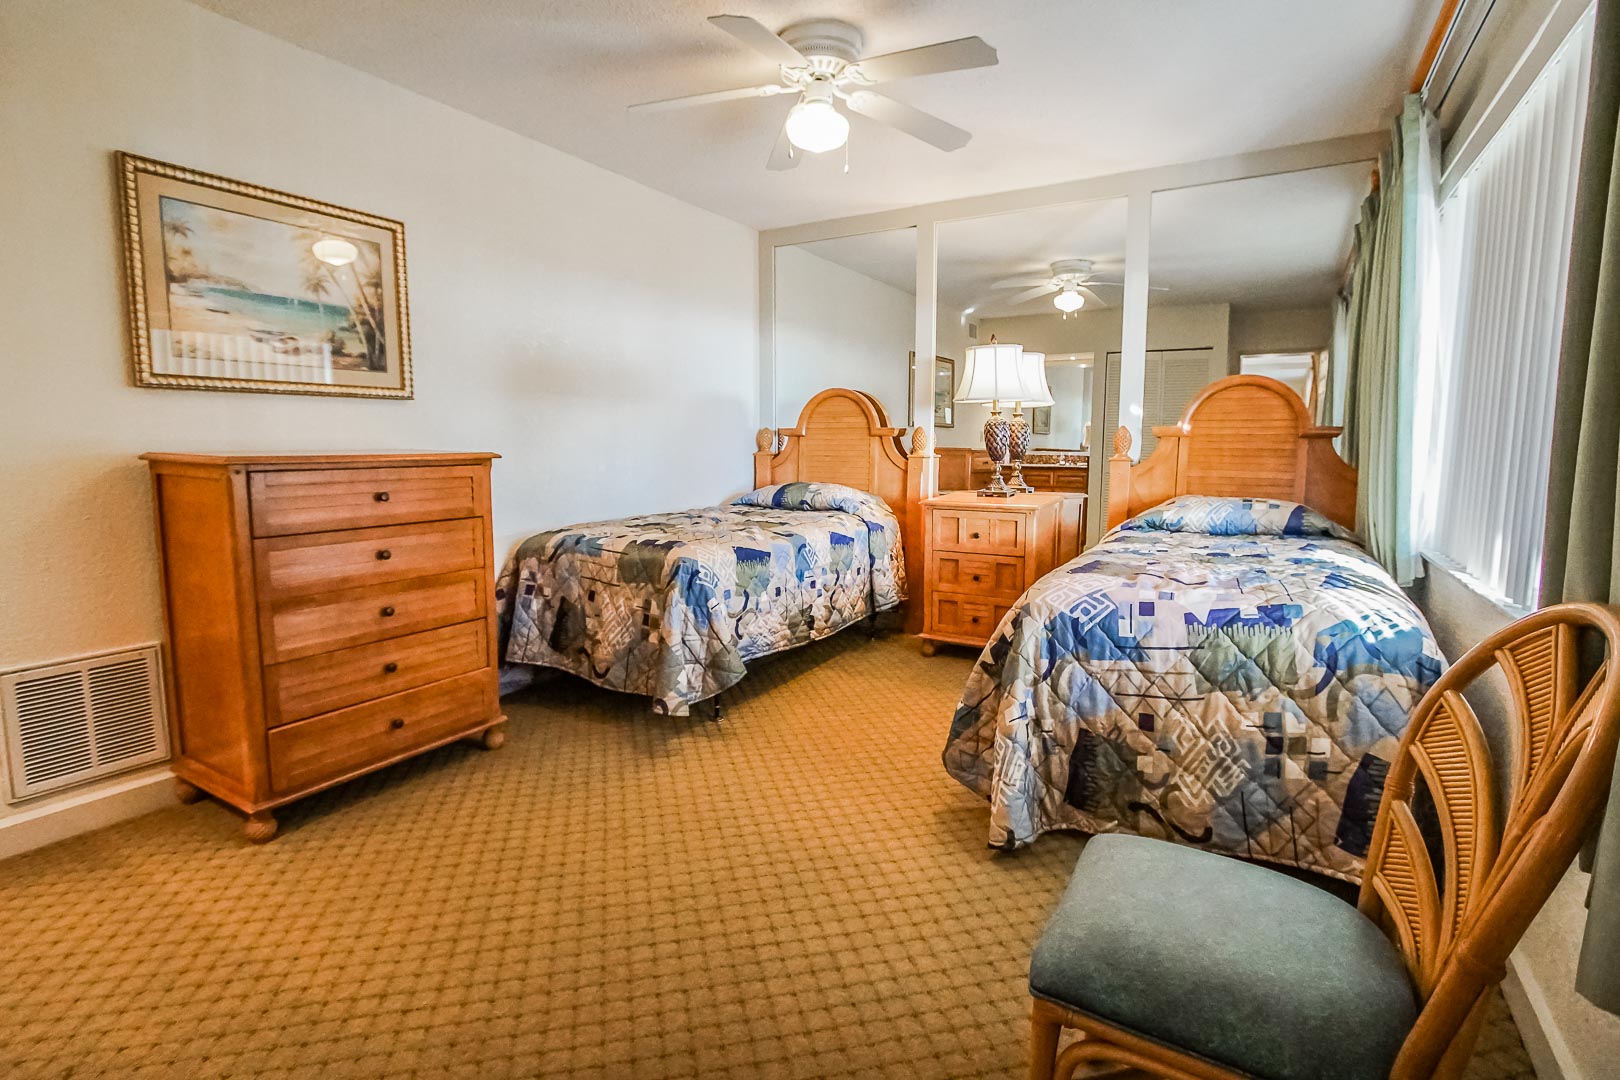 A bedroom with double beds at VRI's Coral Reef Beach Resort in St. Pete Beach, Florida.